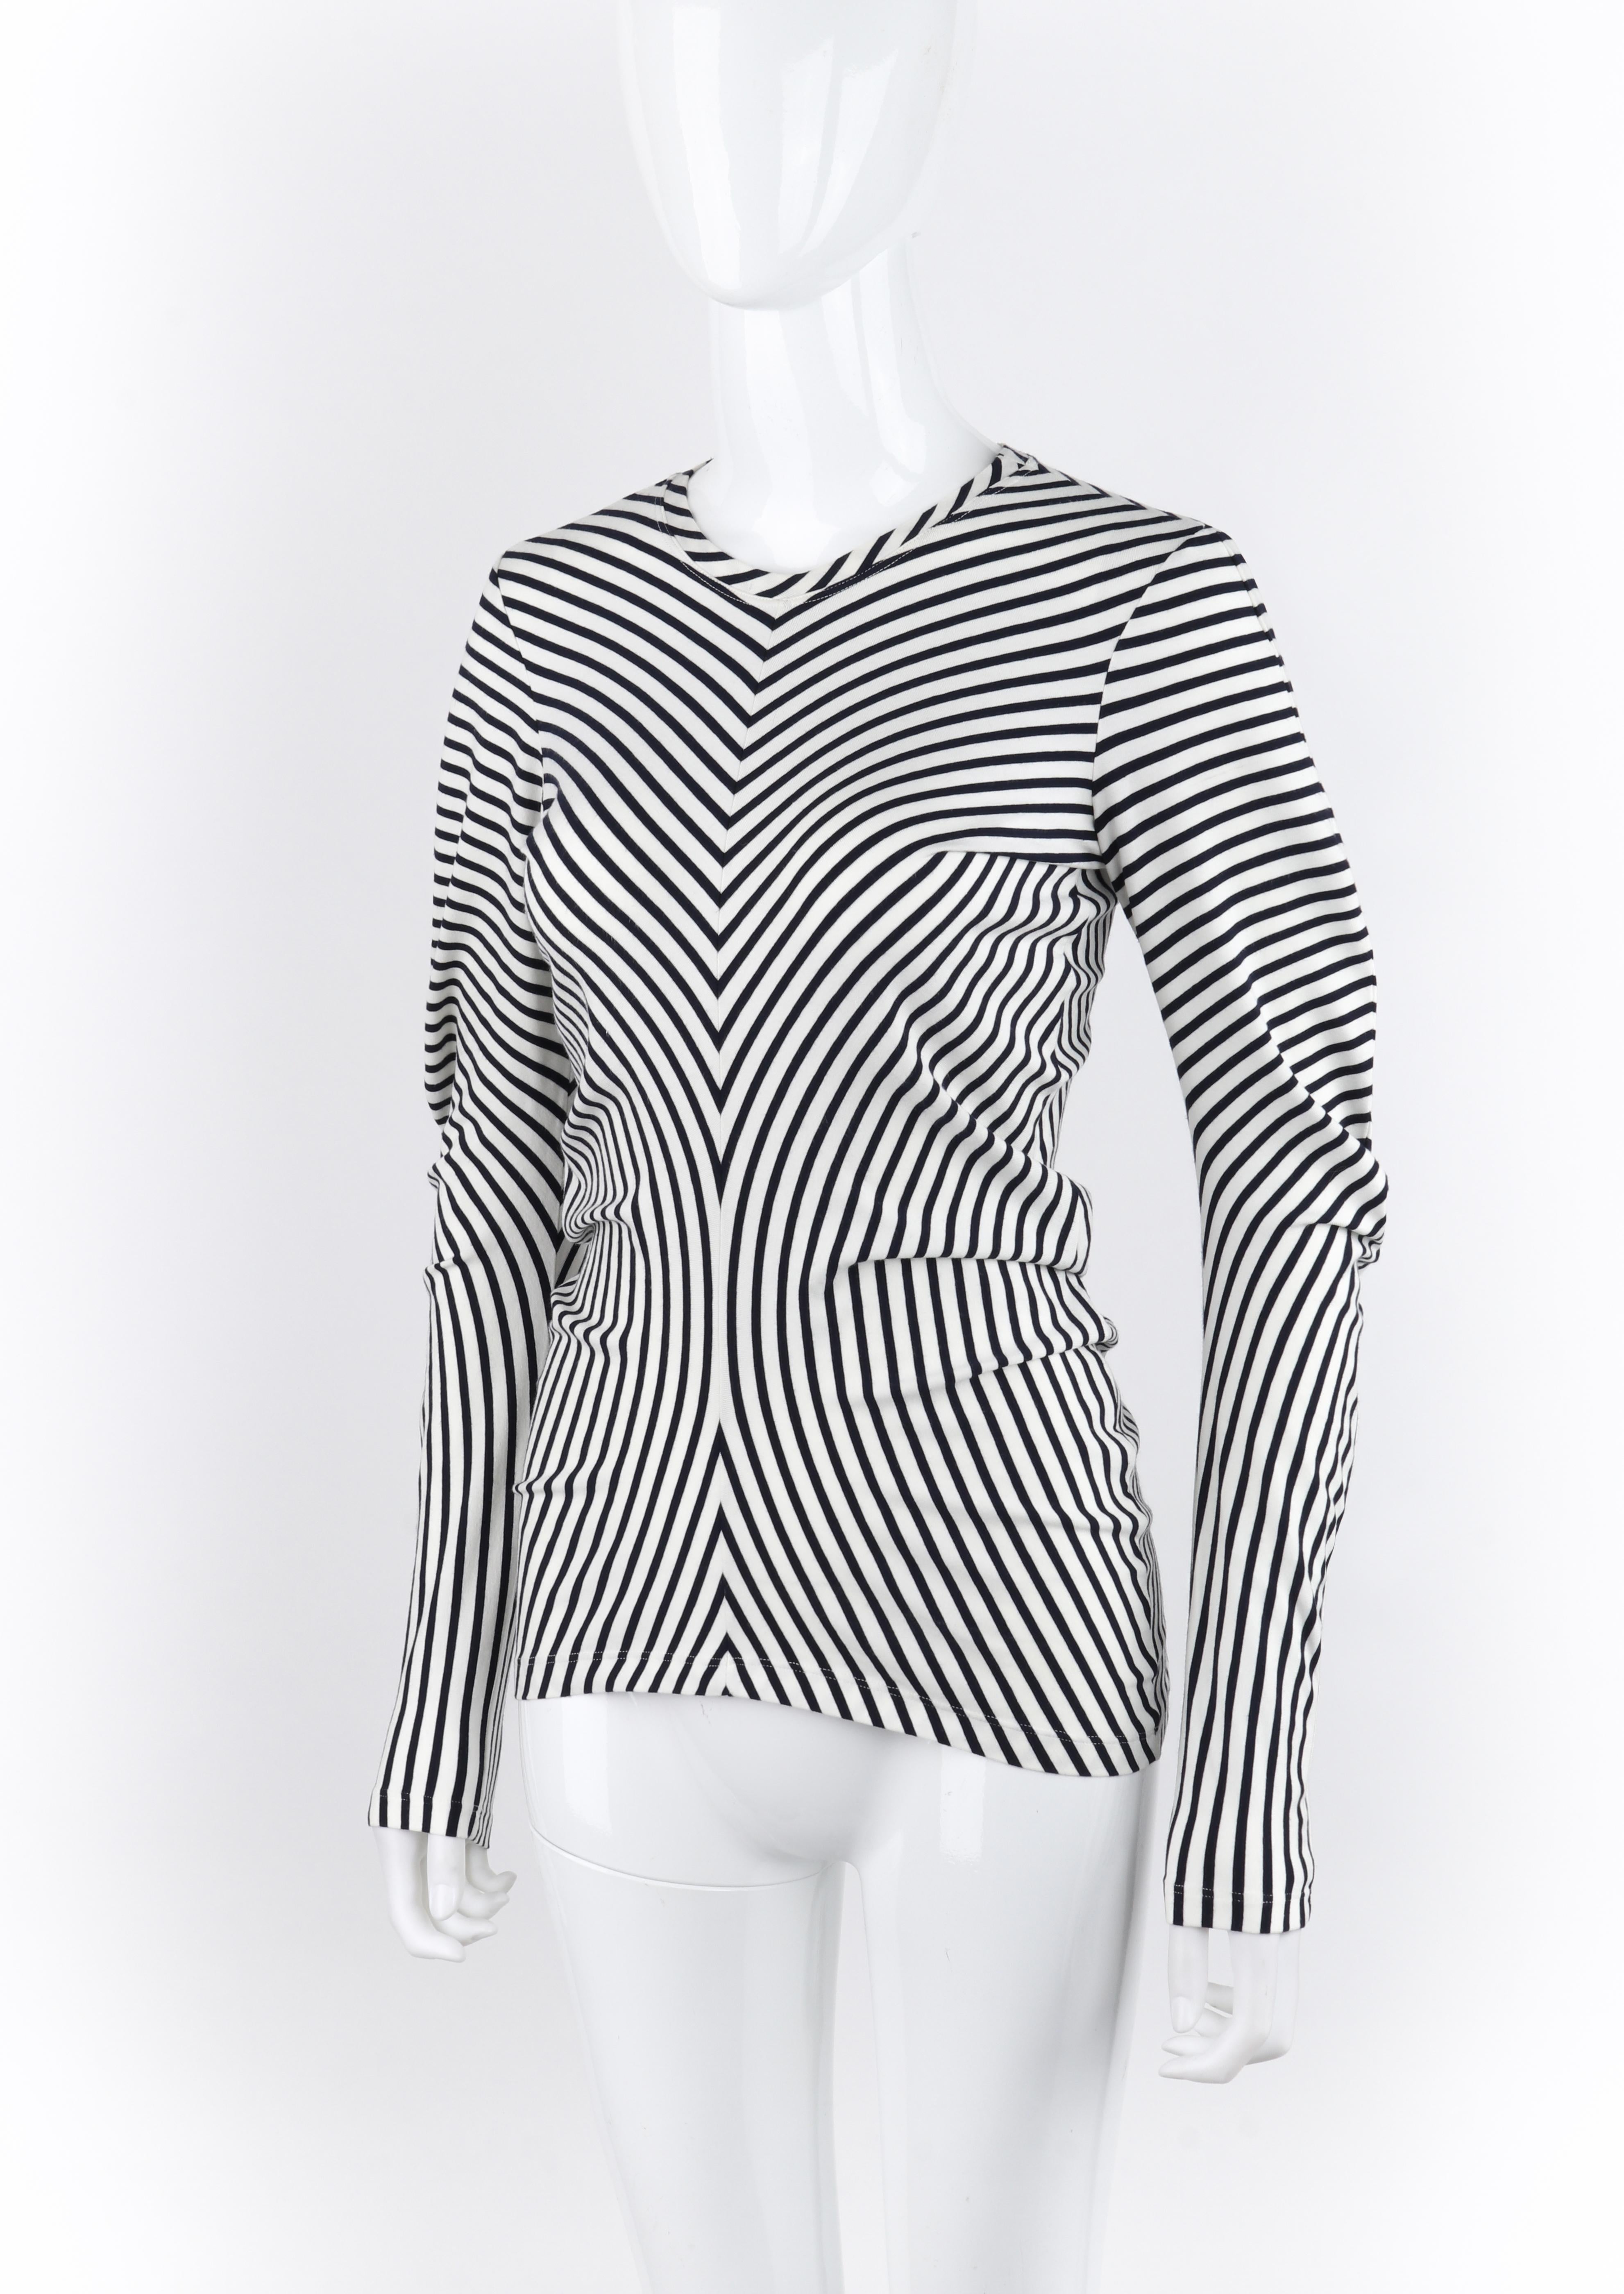 ALEXANDER McQUEEN S/S 2006 Blue White Stripe Knit Curve Long Sleeve Draped Top For Sale 3